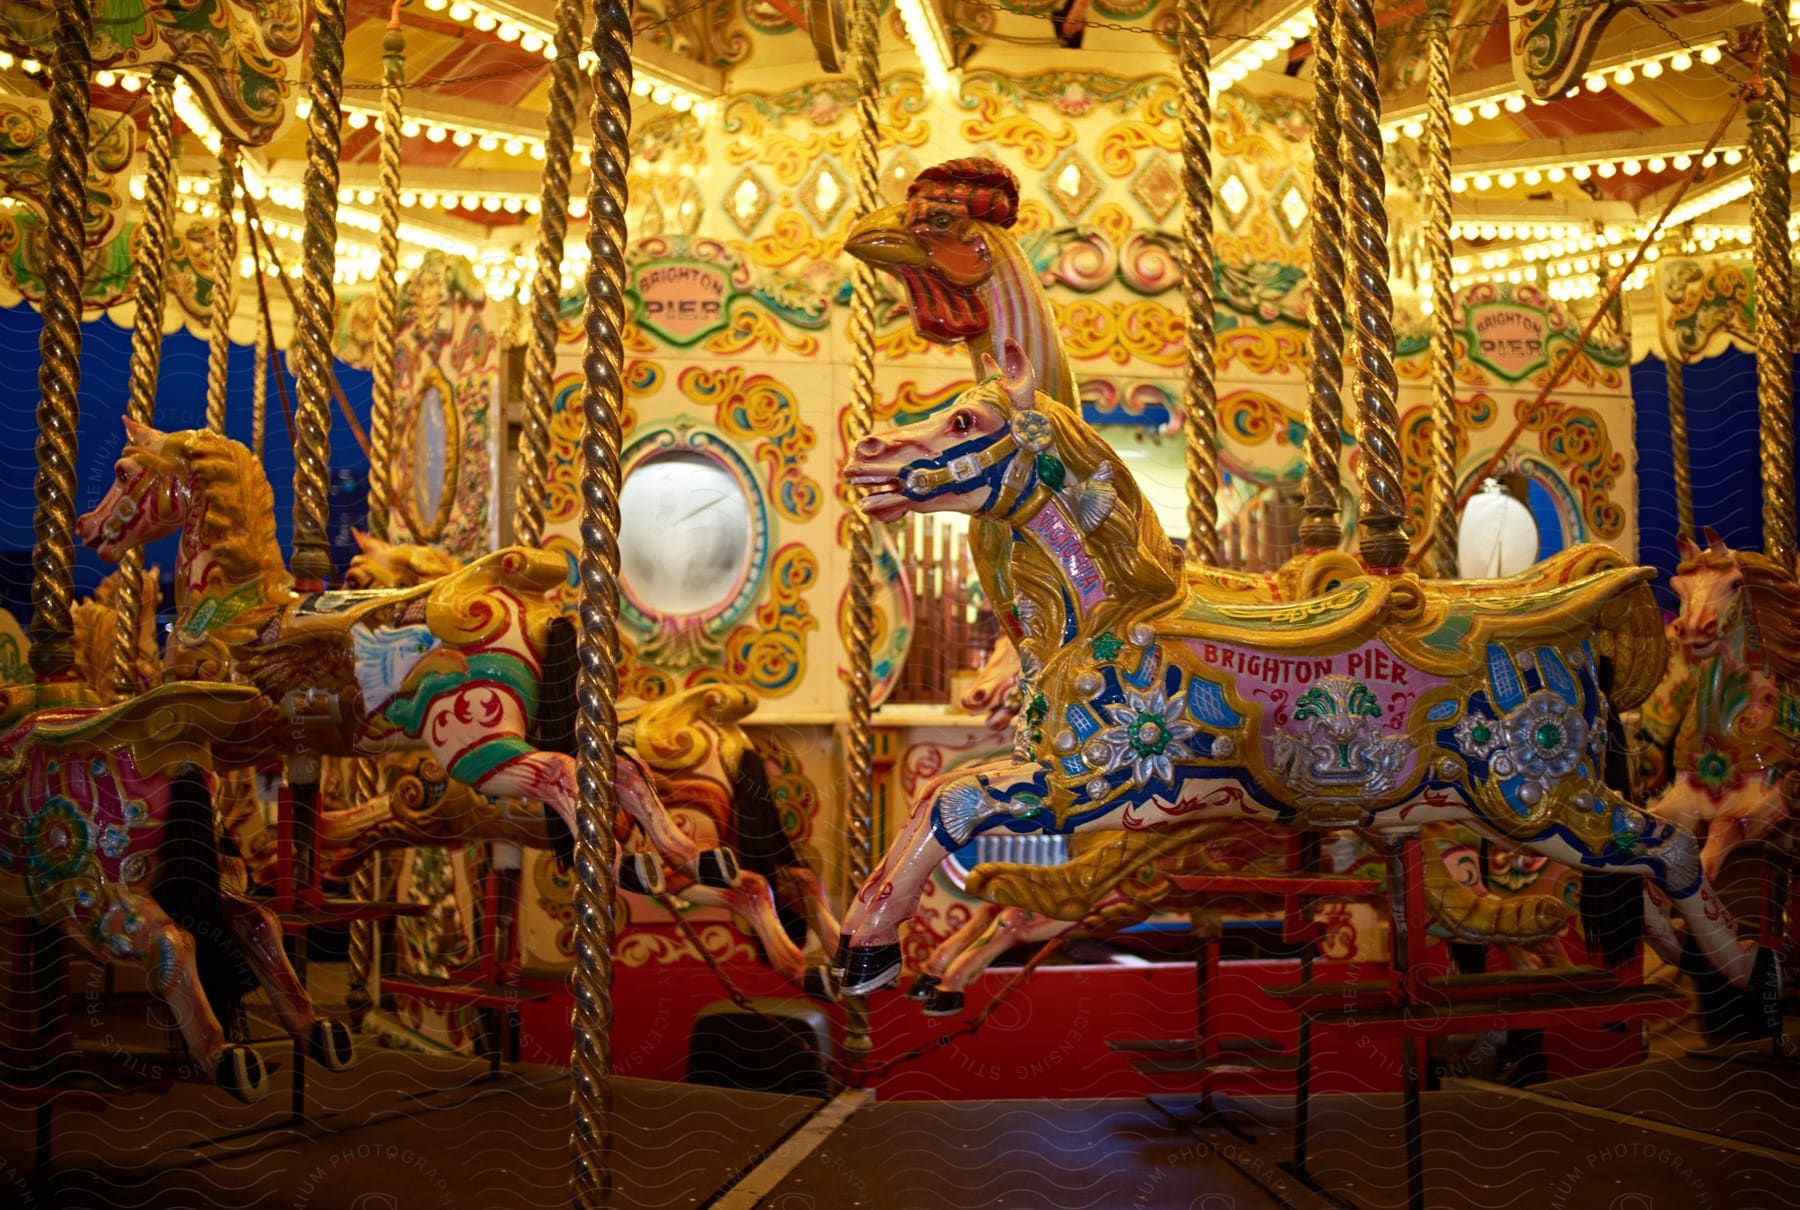 A colorful and richly decorated carousel at a fair. Several of the carousel's horses are visible, adorned with intricate designs and vibrant colors.